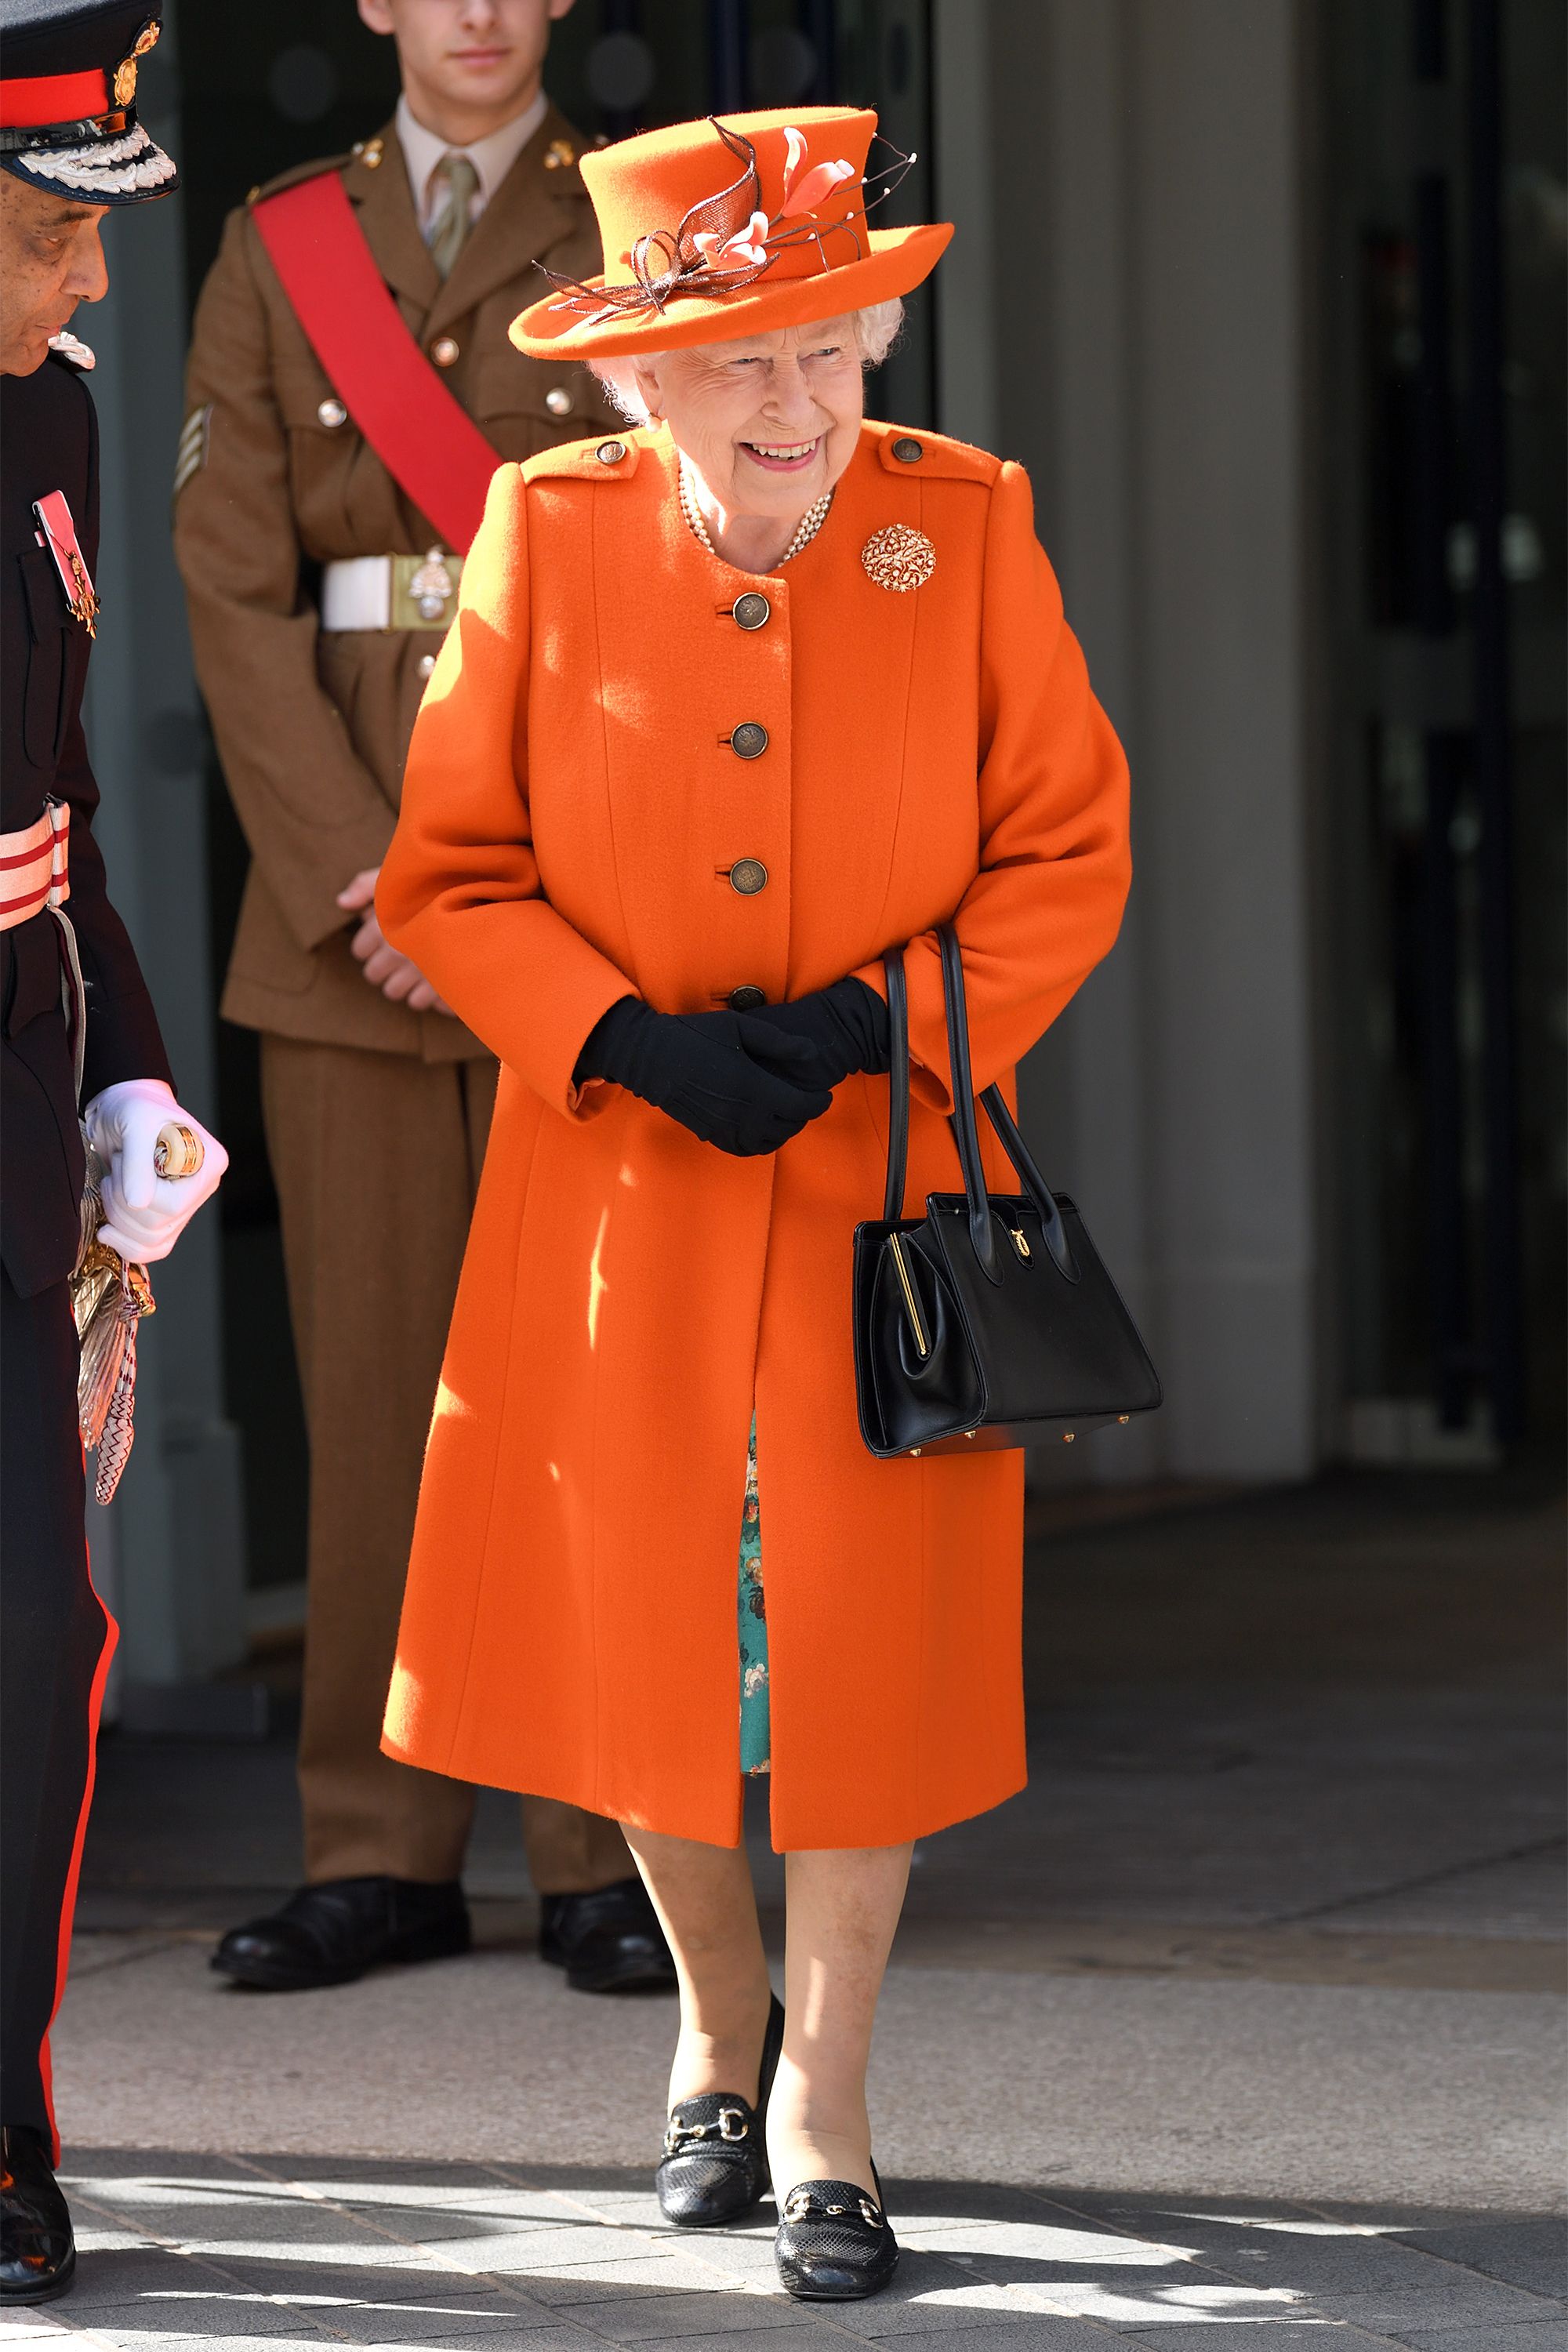 Queen Elizabeth Changes Her Outfit Seven Times on Christmas Day